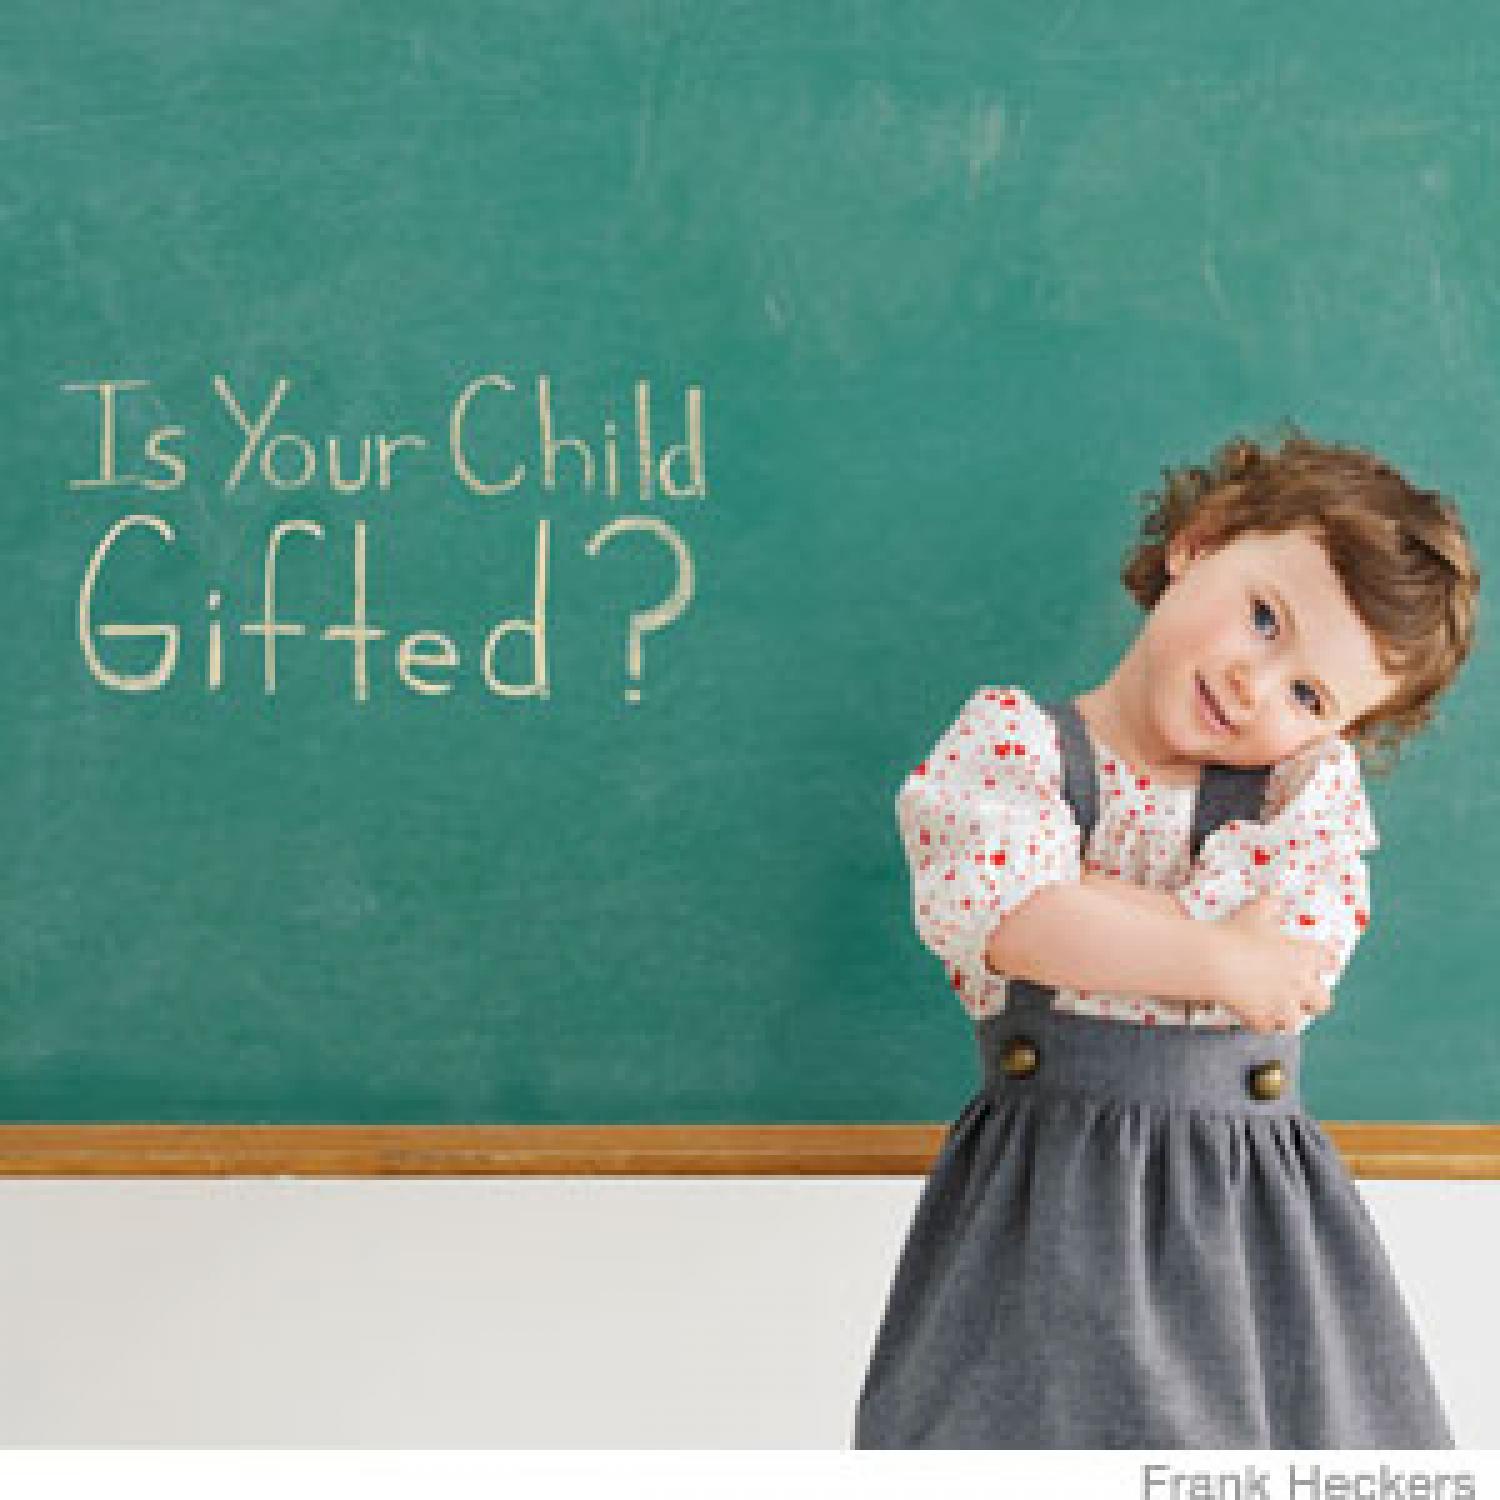 Gifted vs. Hard-working Child